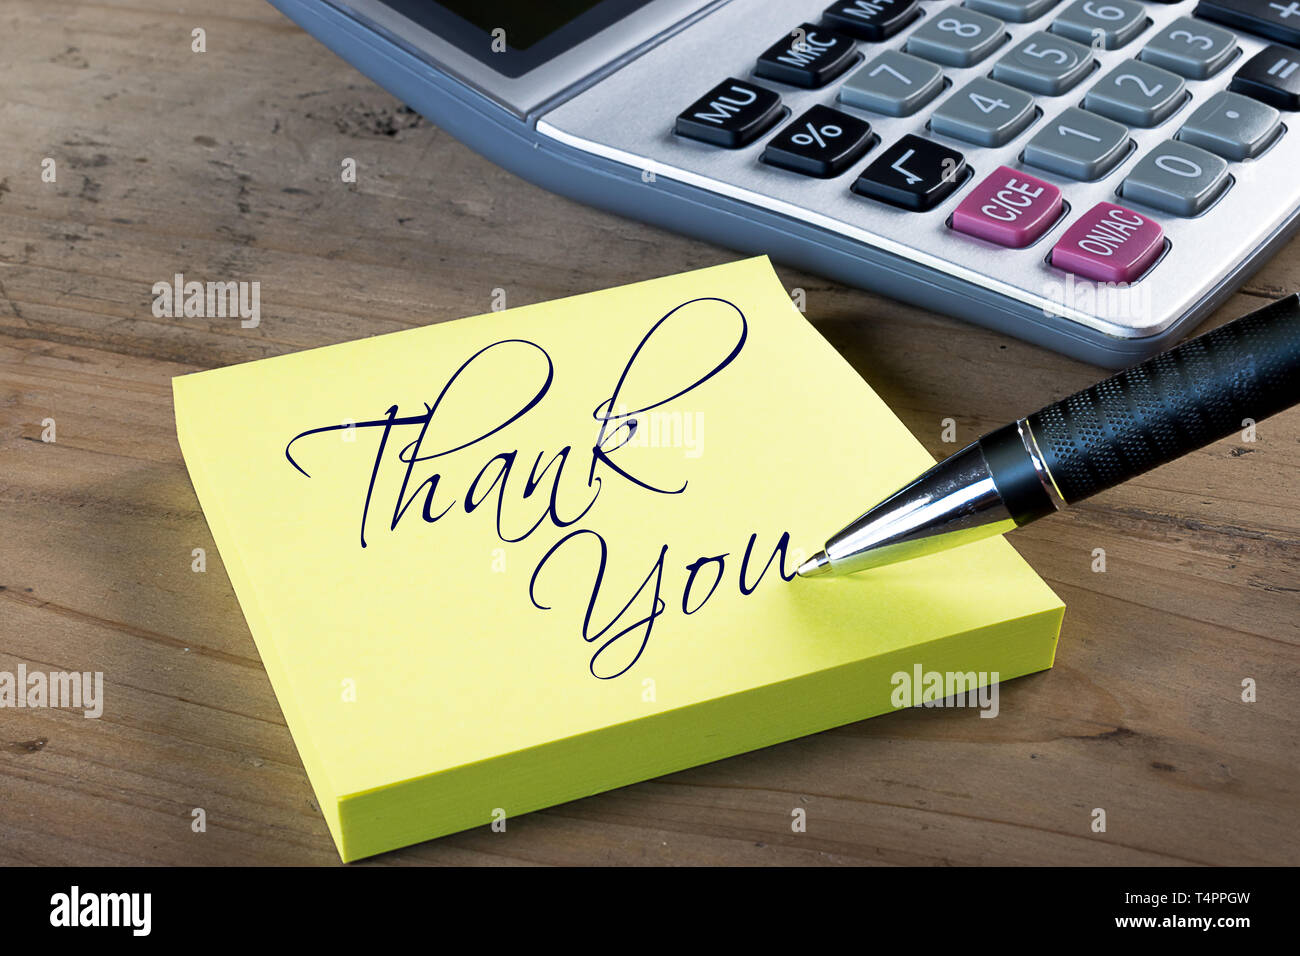 Yellow sticky note with 'Thank you' written with pen. Administrative Professionals or Secretaries day concept. Stock Photo